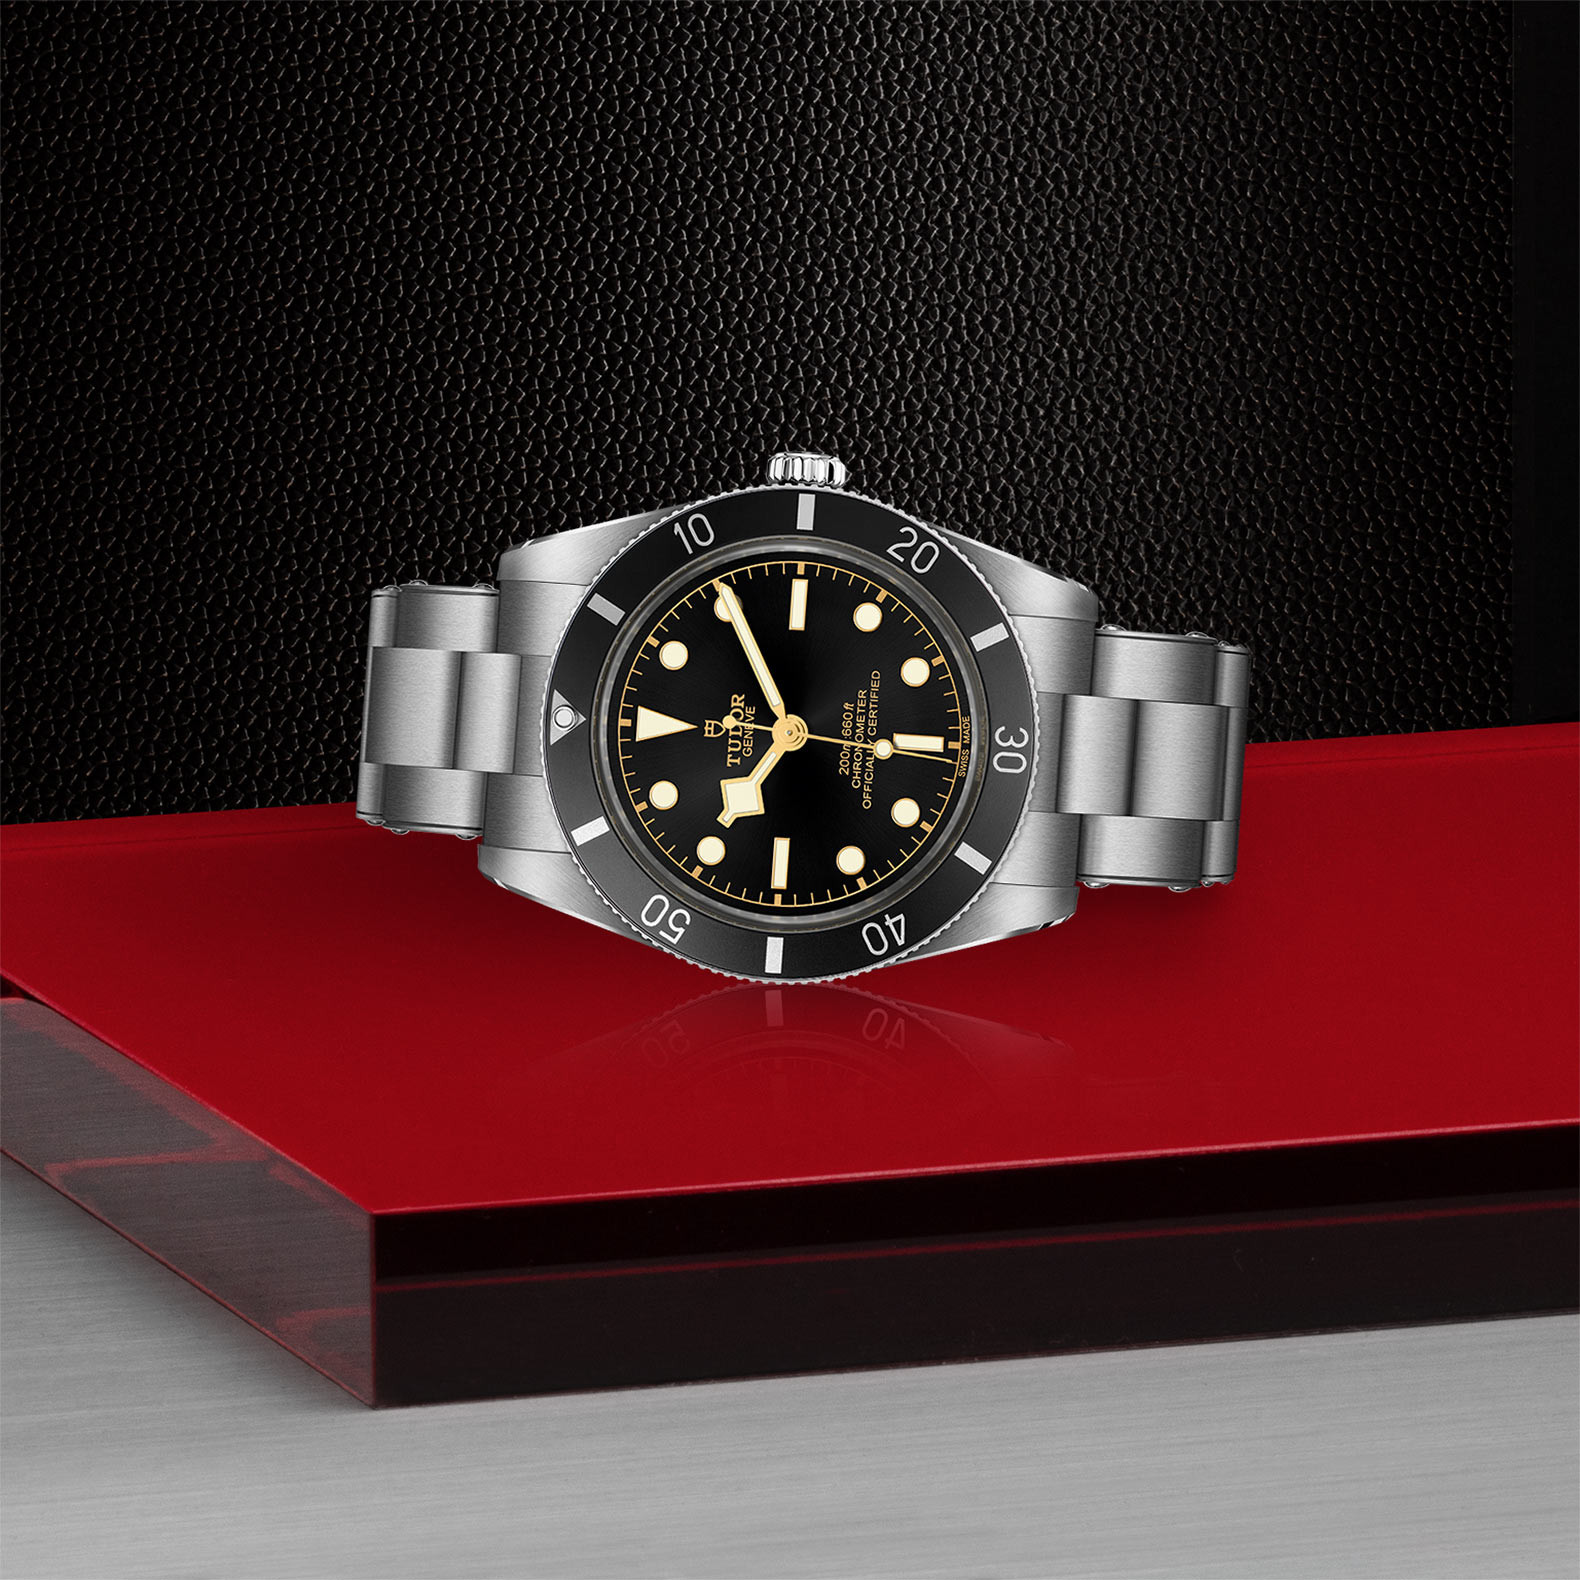 TUDOR Black Bay 54 with 37mm Steel Case and Steel Bracelet M79000N-0001 Watch in Store Laying Down